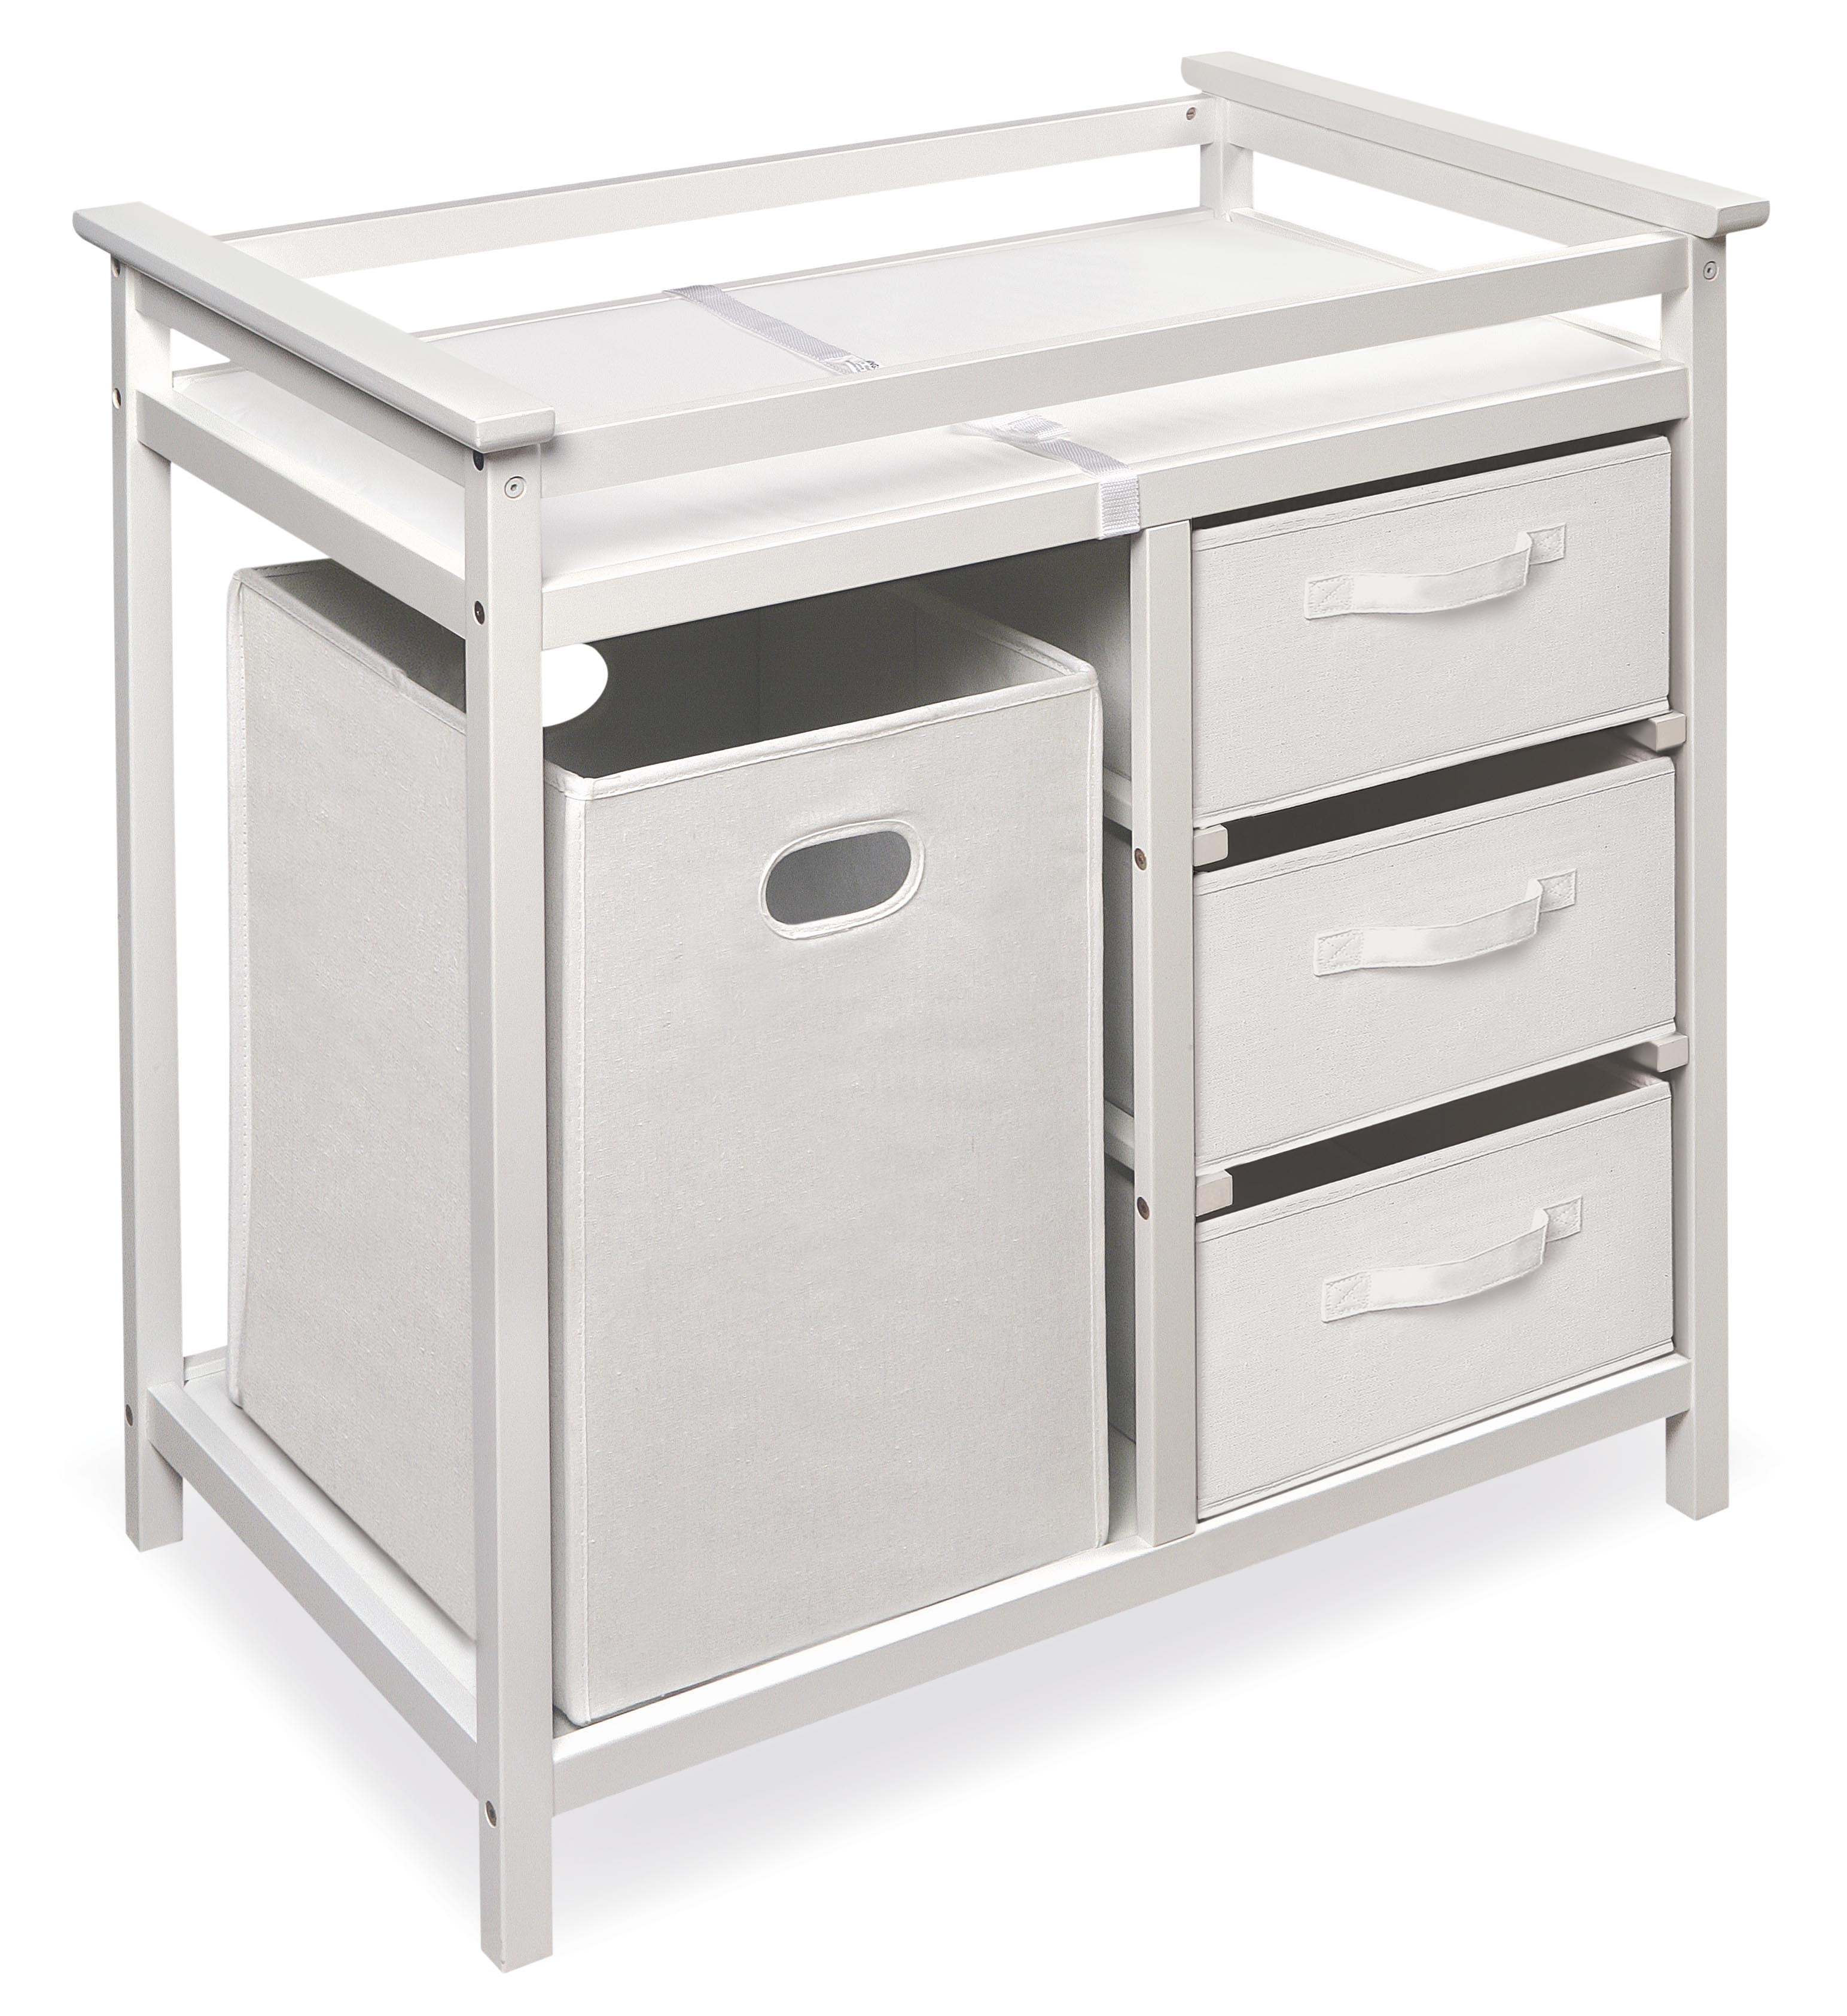 White 3 Removable Baskets and pad Modern Baby Changing Table with Laundry Hamper BestComfort Infant Diaper Station 